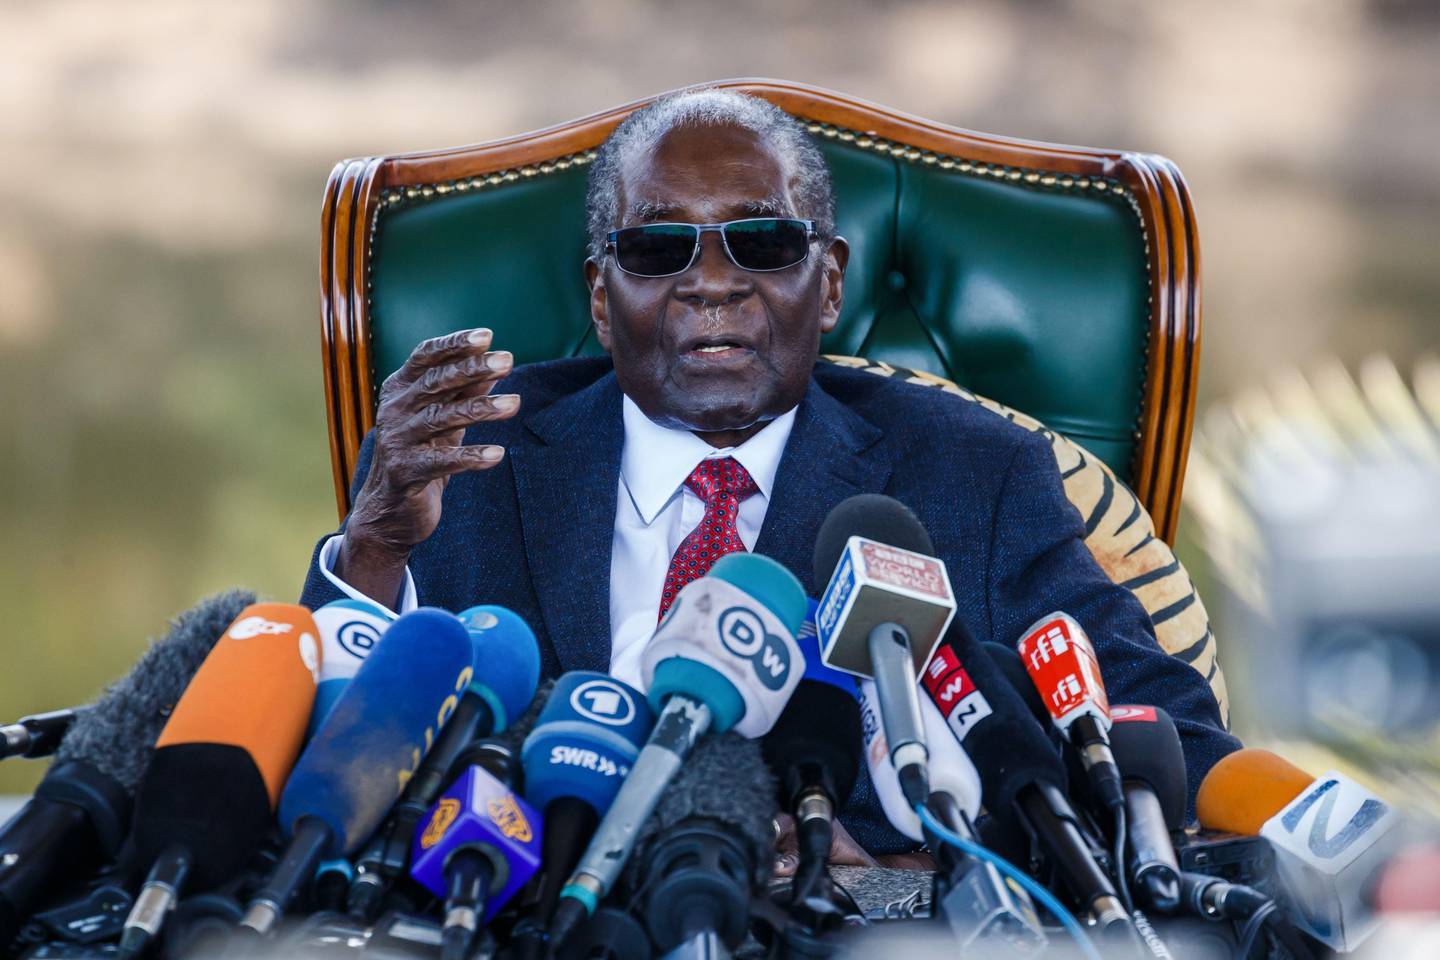 (FILES) In this file photo taken on July 29, 2018 former Zimbabwean President Robert Mugabe addresses media during a surprise press conference at his residence "Blue Roof " in Harare, on the eve of the country's first election since he was ousted from office last year. - Mugabe, who held power since independence from British colonial rule in 1980, presided over Zimbabwe's decline from a regional power with huge potential, to a ruined country from which millions fled. Many hoped his fall would mark a new era for the country and a re-birth of its economy, but Chihota says business at his plastic manufacturing firm is at its slowest since he started eight years ago. (Photo by Jekesai NJIKIZANA / AFP)